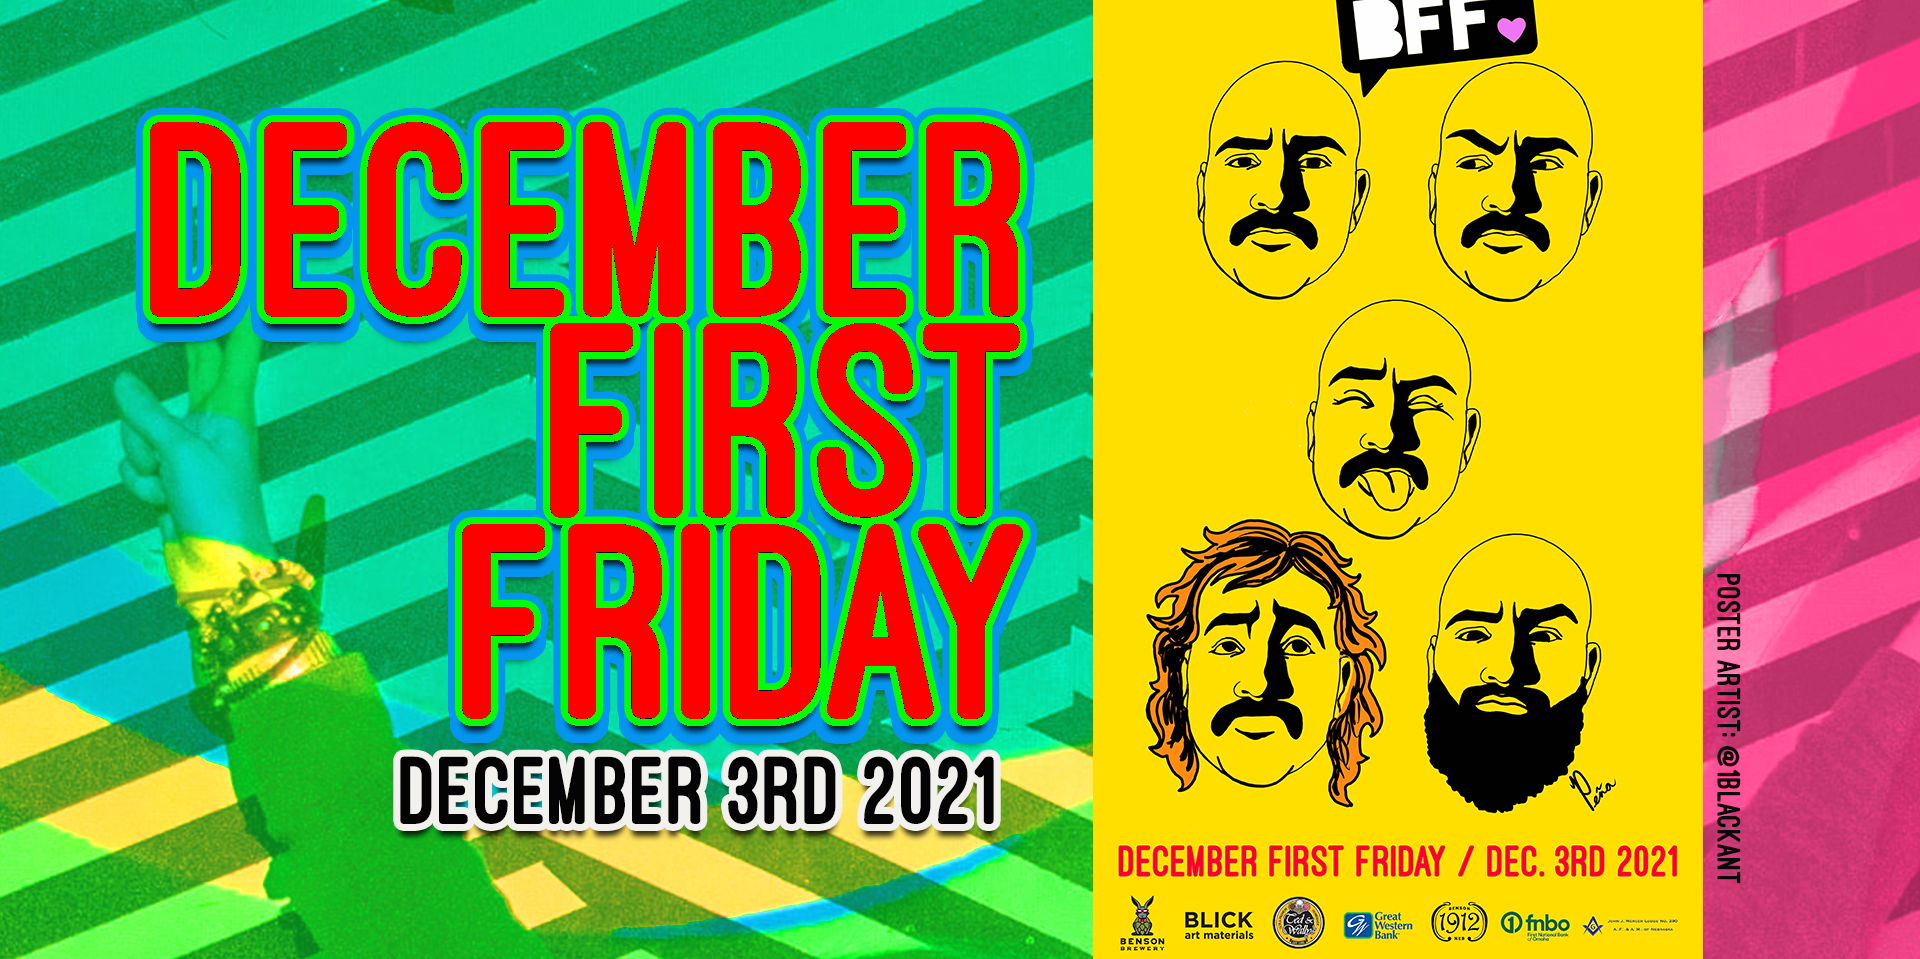 December 3rd First Friday! promotional image